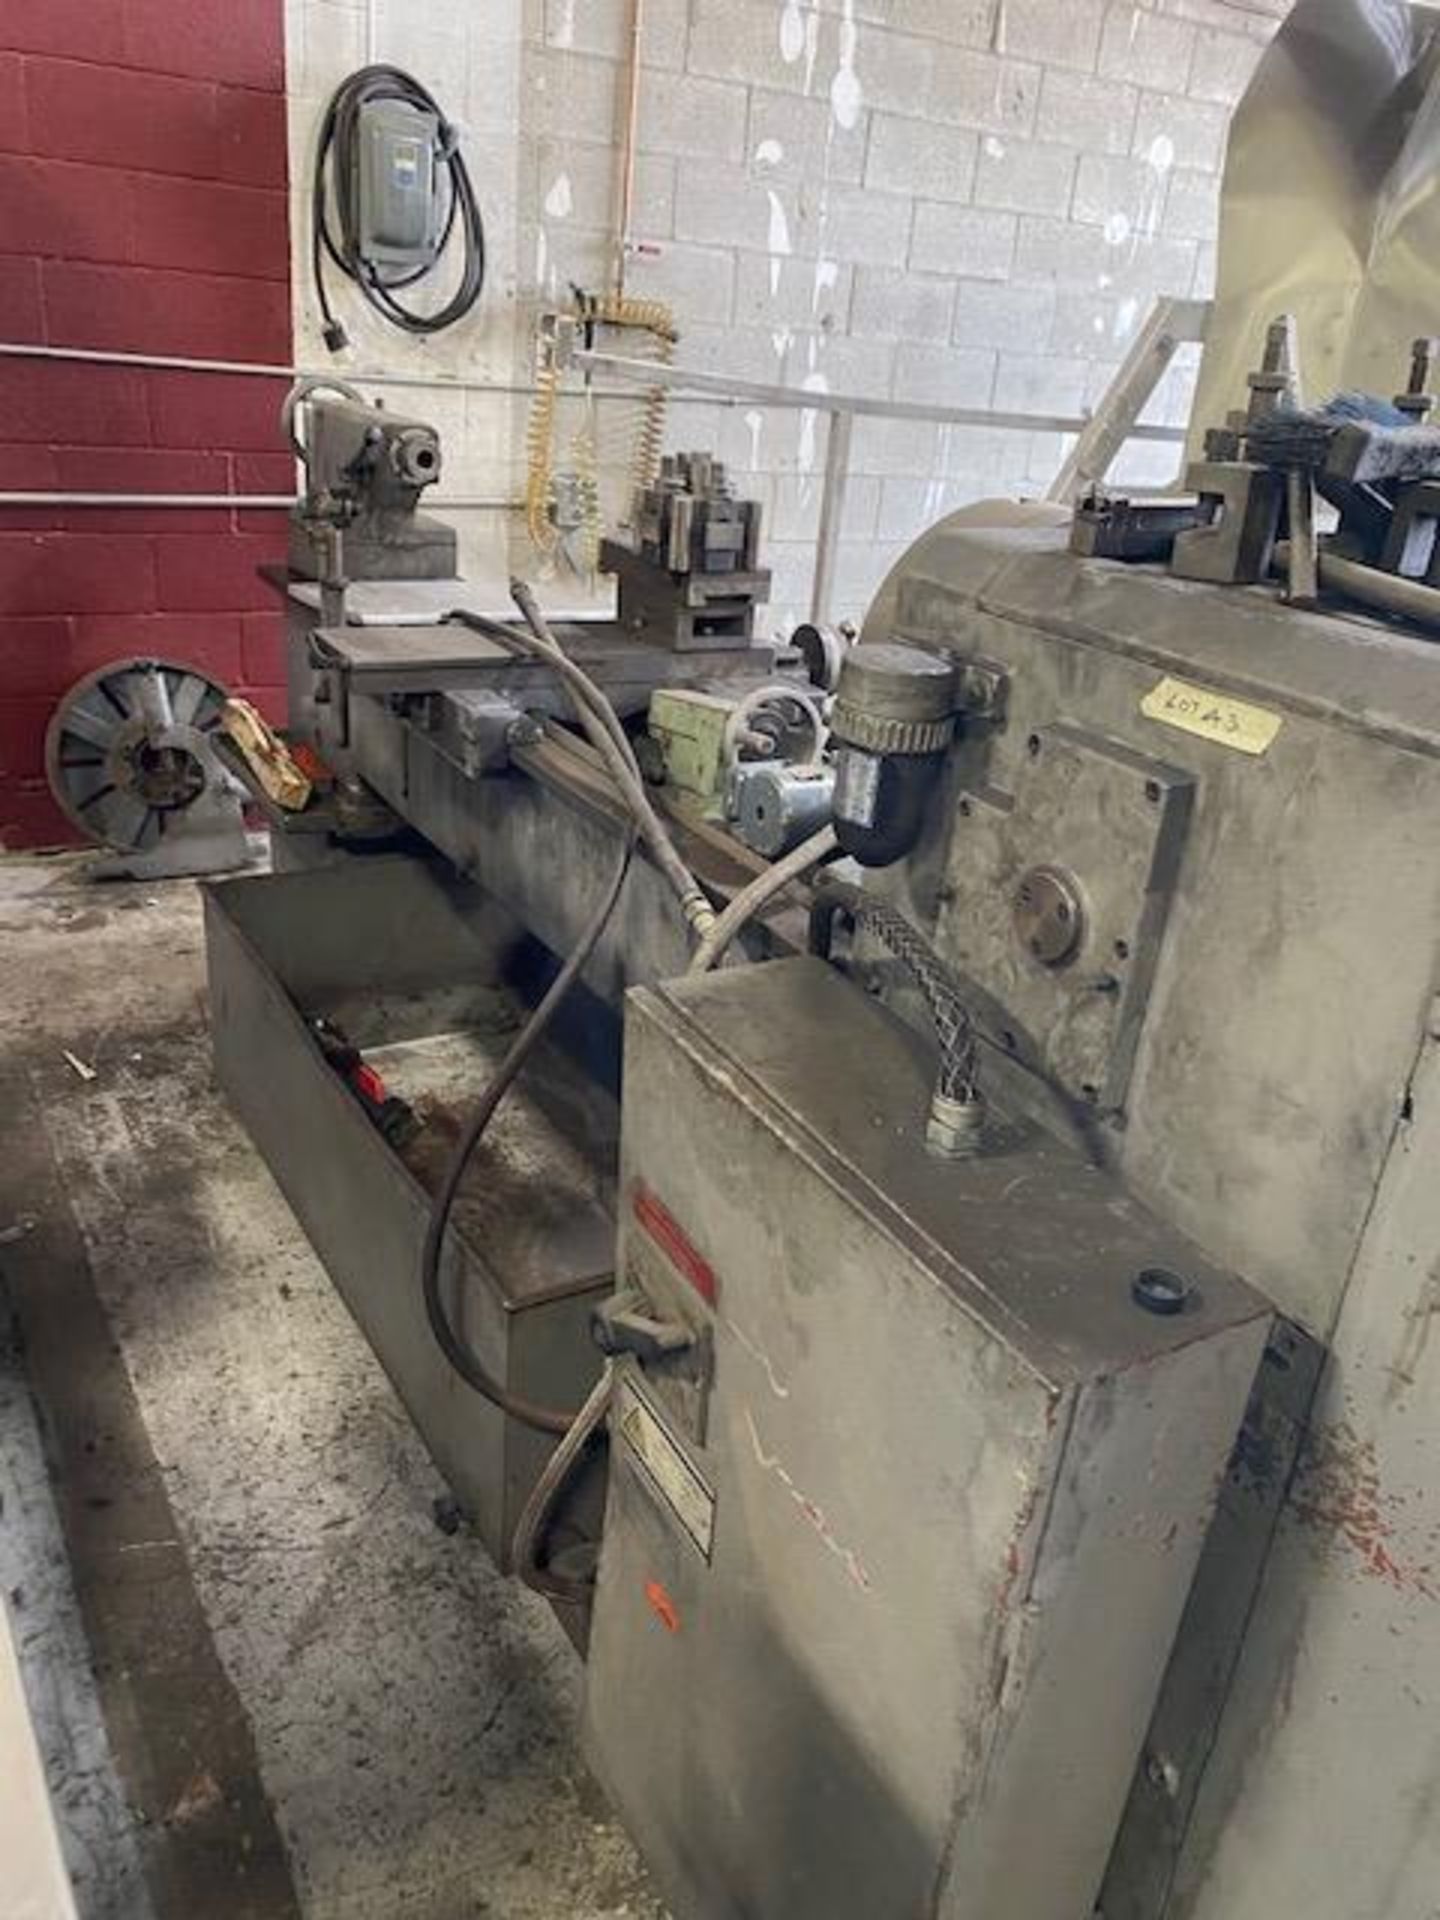 POWER MASTER MACHINERY LAITHE MACHINE (METAL SHAPER), J. MK 530 - 575 VOLT (AS IS WHERE IS) - Image 2 of 7